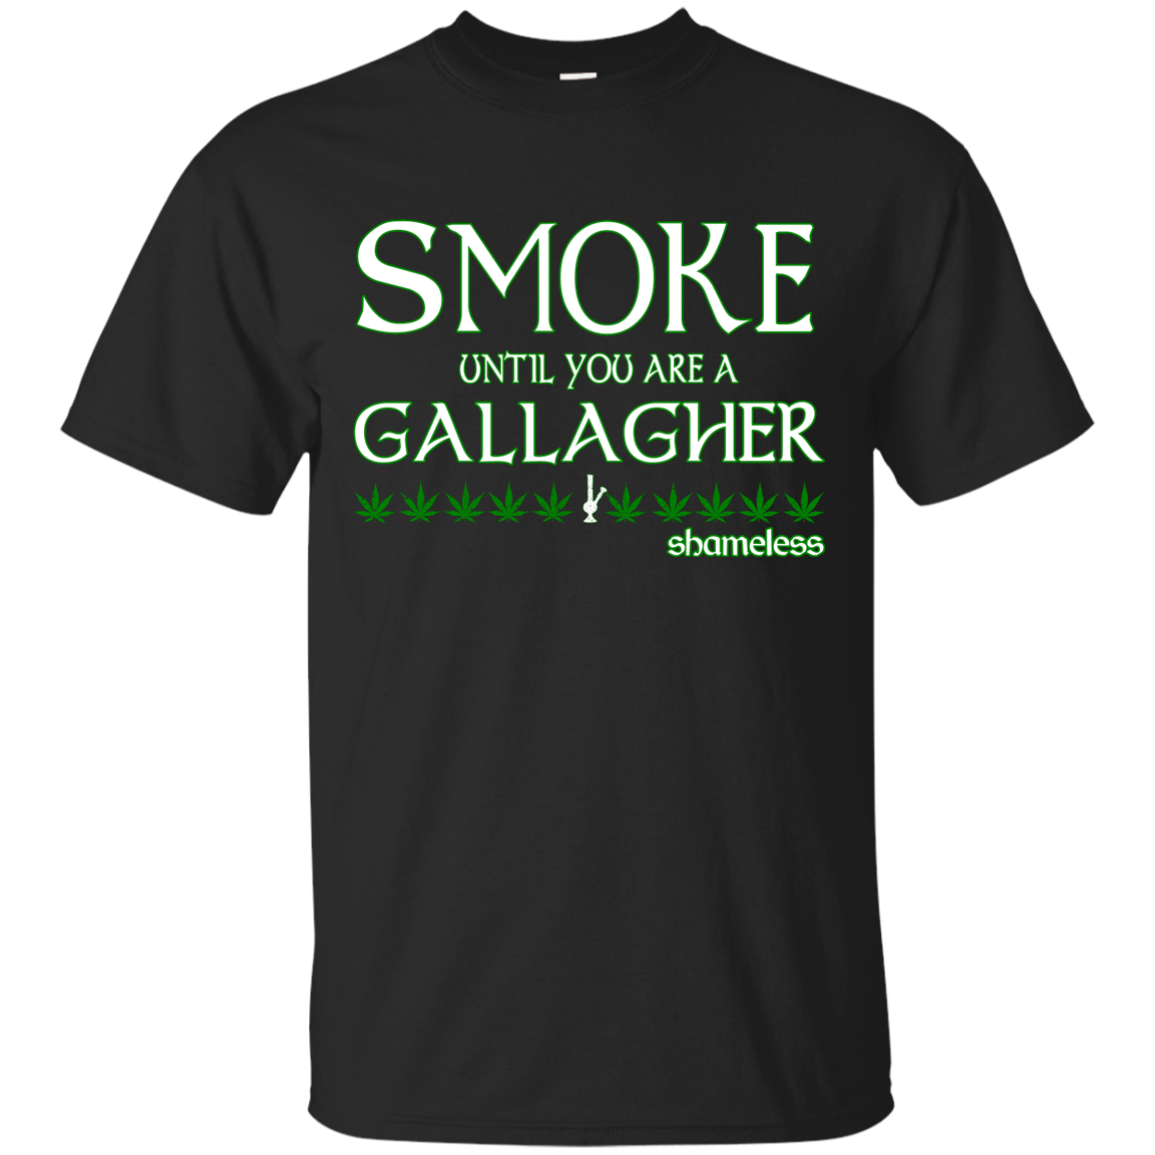 Shameless Smoke Until You Are a Gallagher shirt, hoodie, tank